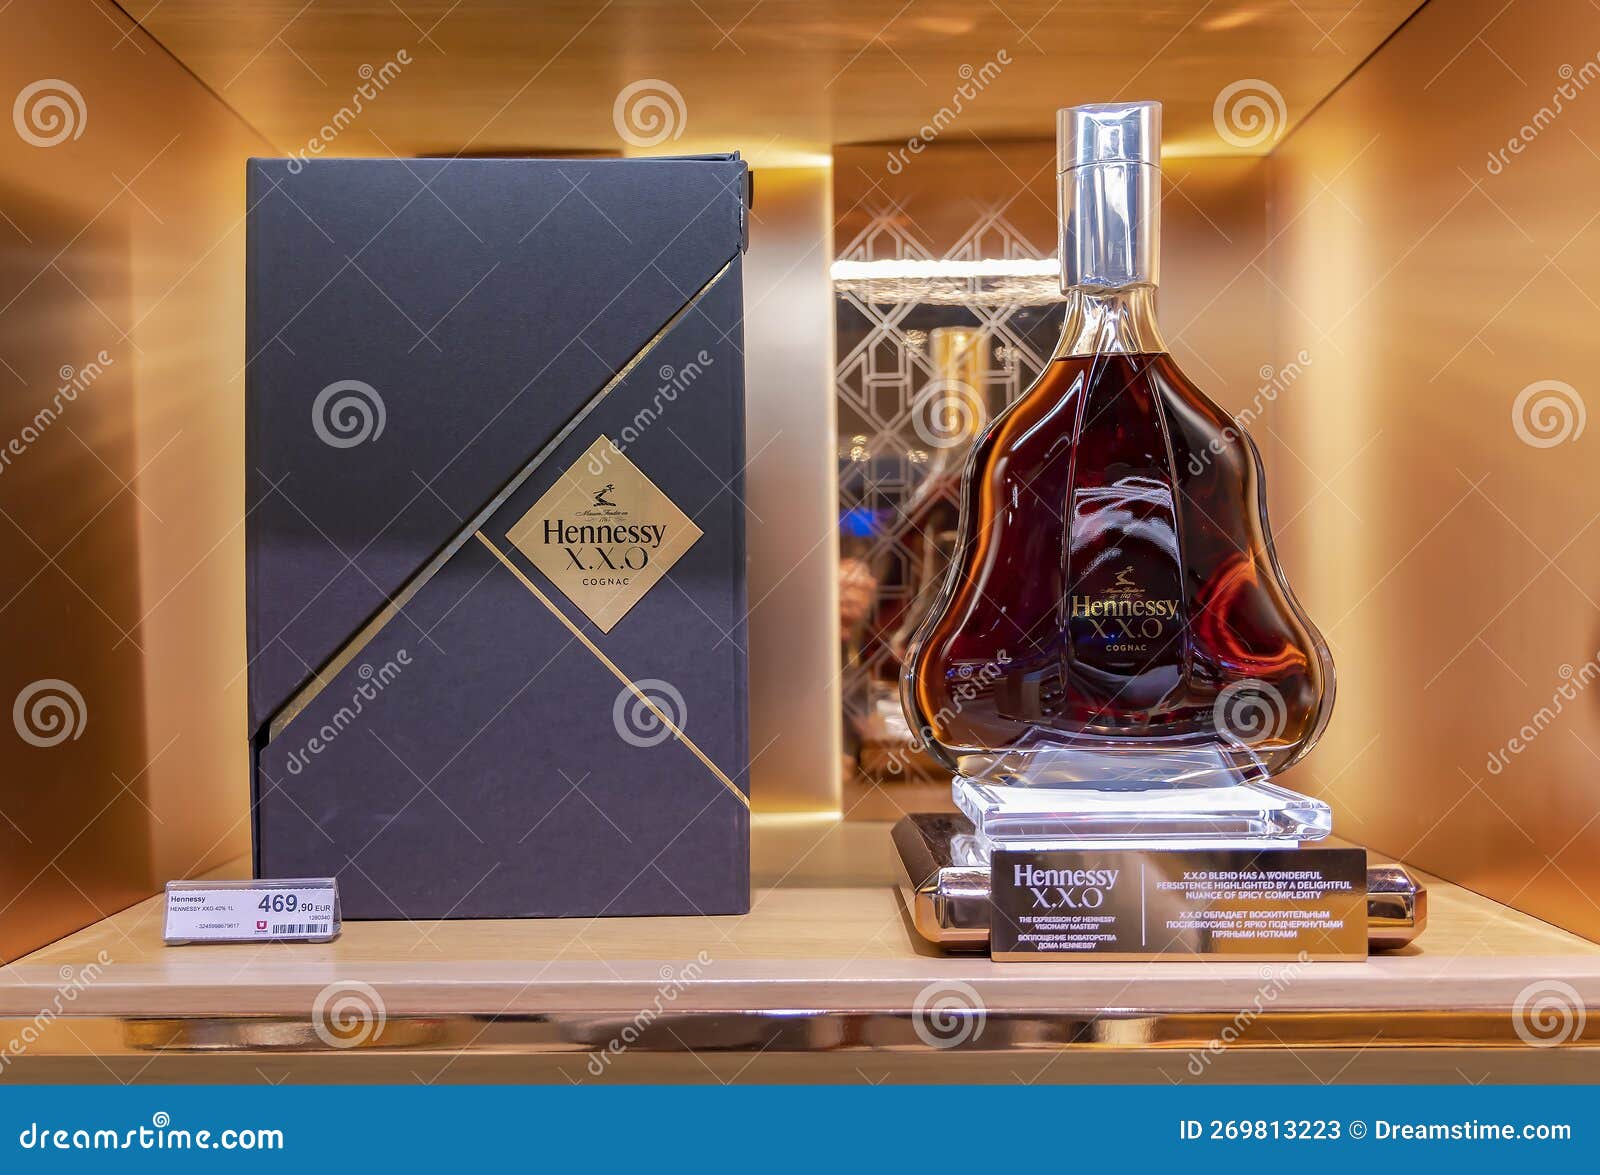 Exclusive Hennessy X.X editorial stock photo. Image of lighting - 269813223